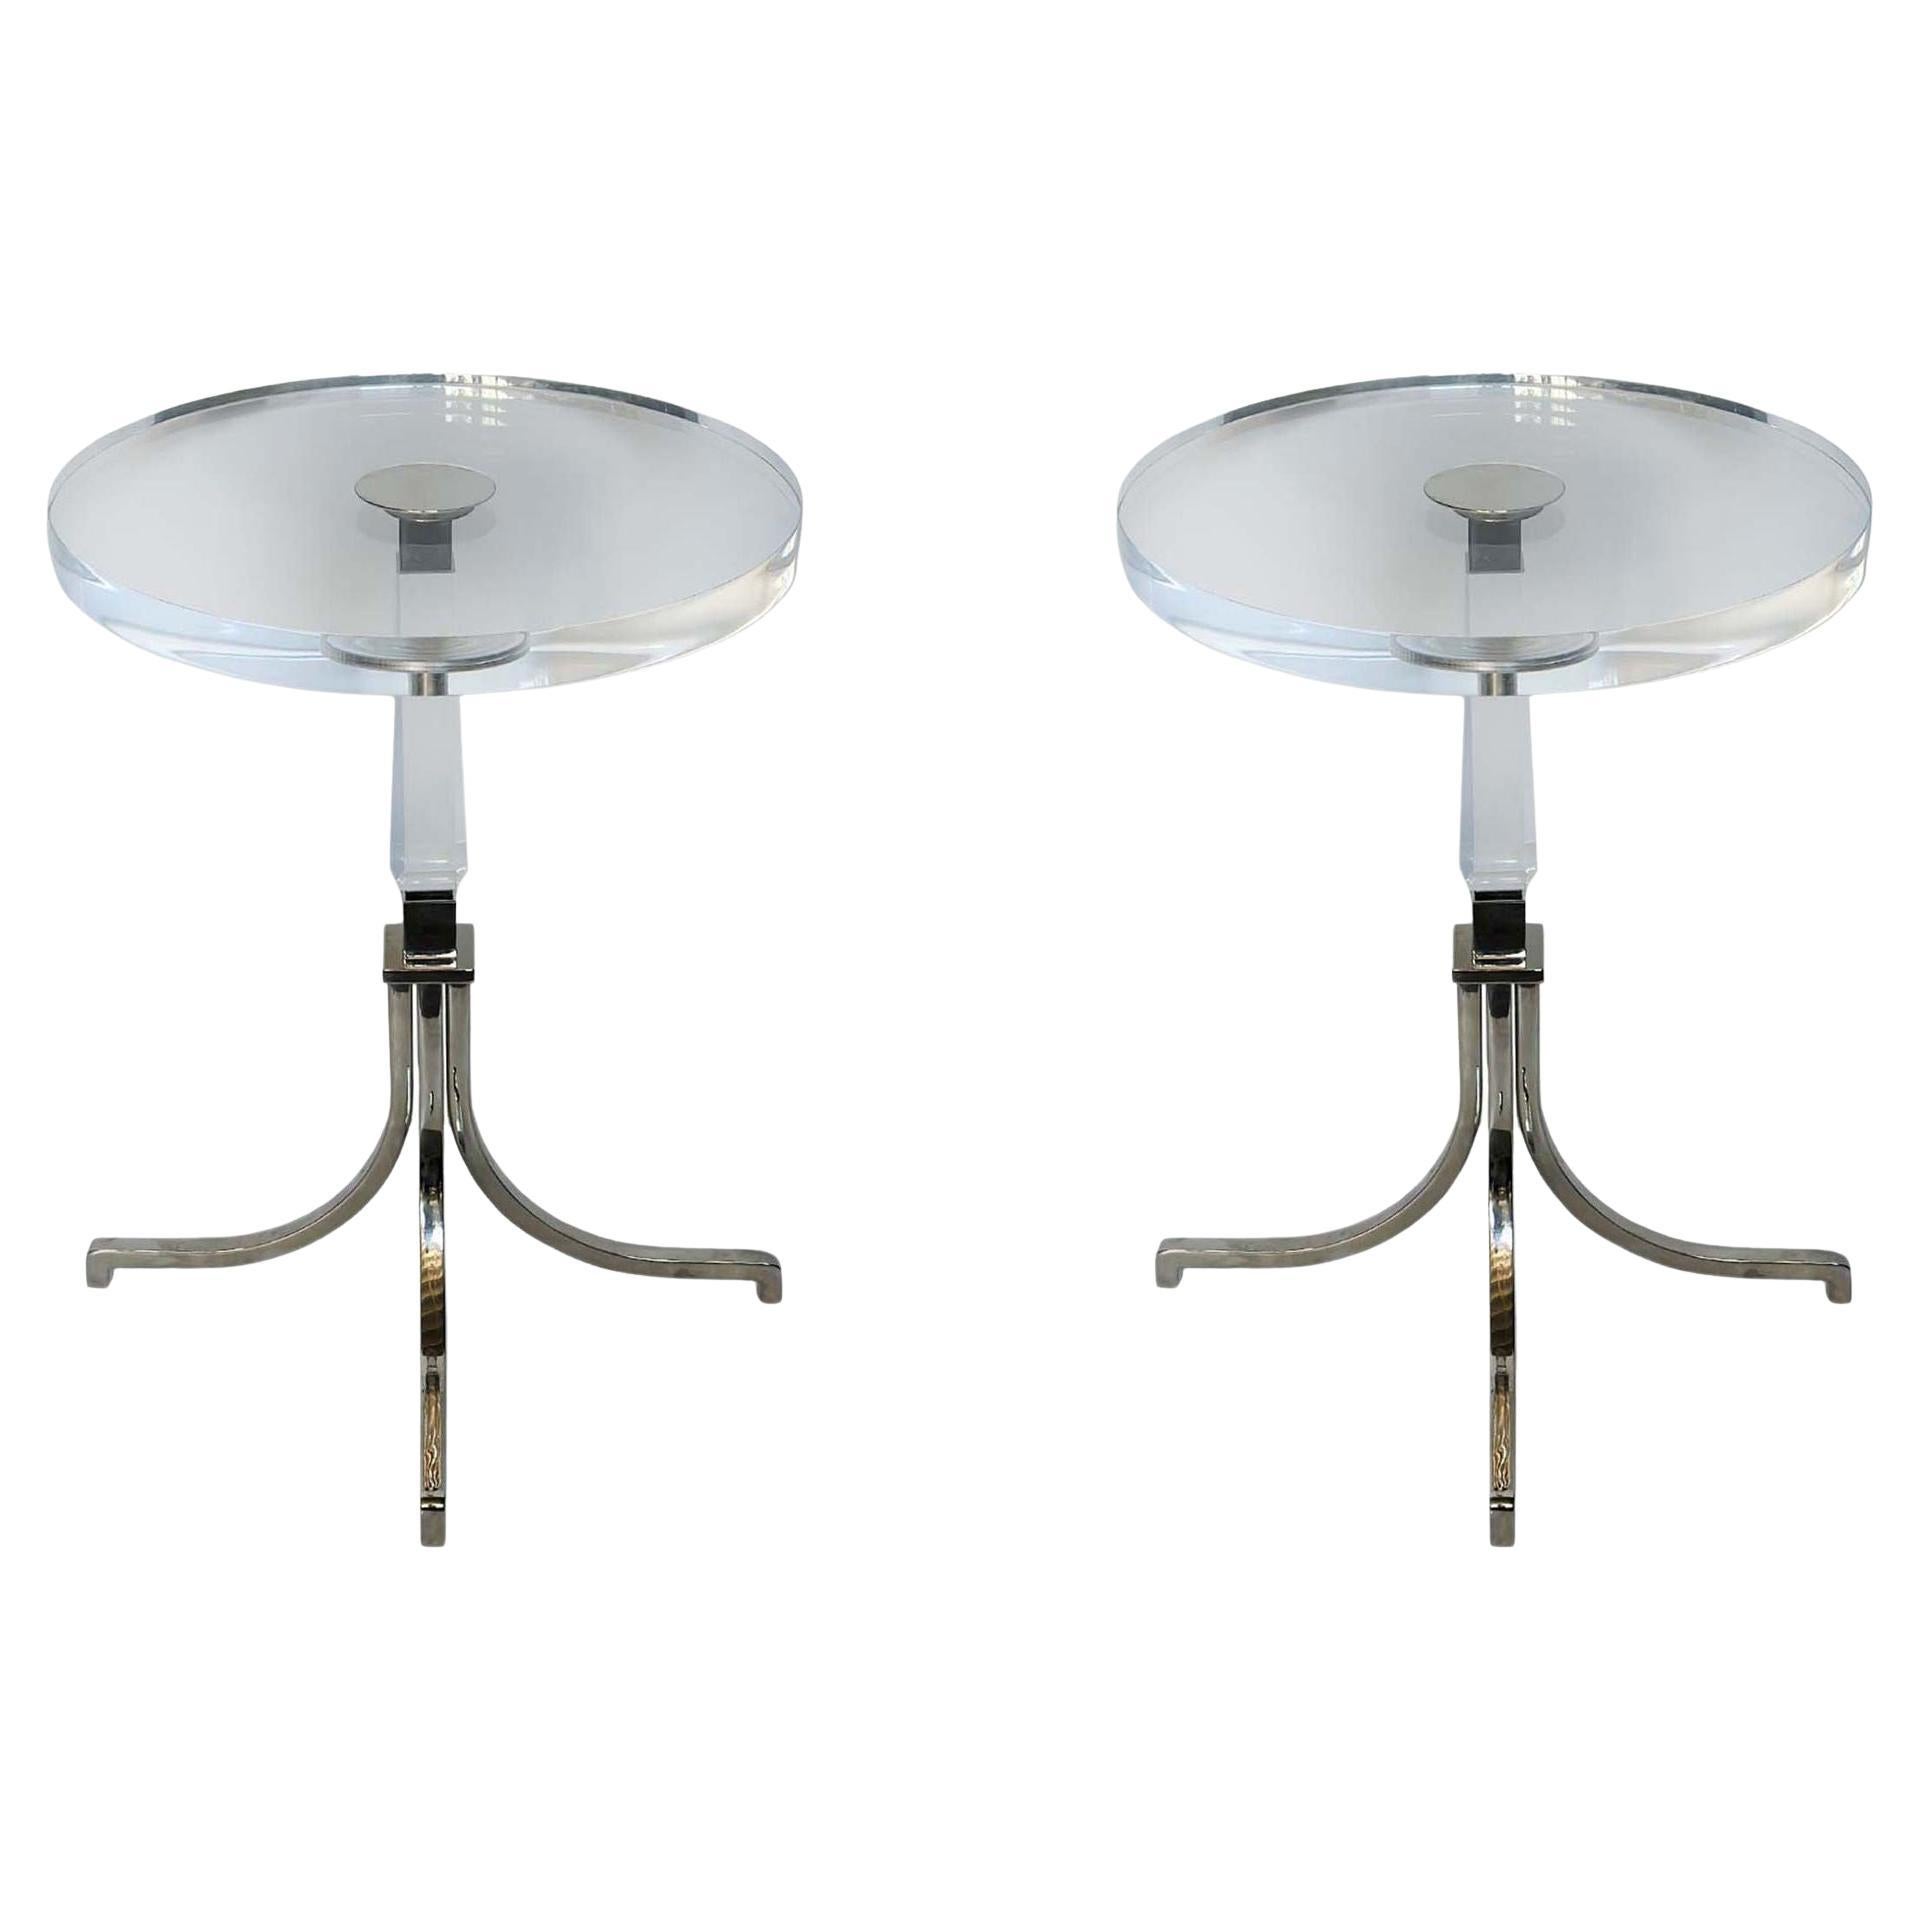 Pair of Round Lucite and Chrome Side Tables by Charles Hollis Jones, c. 1970's